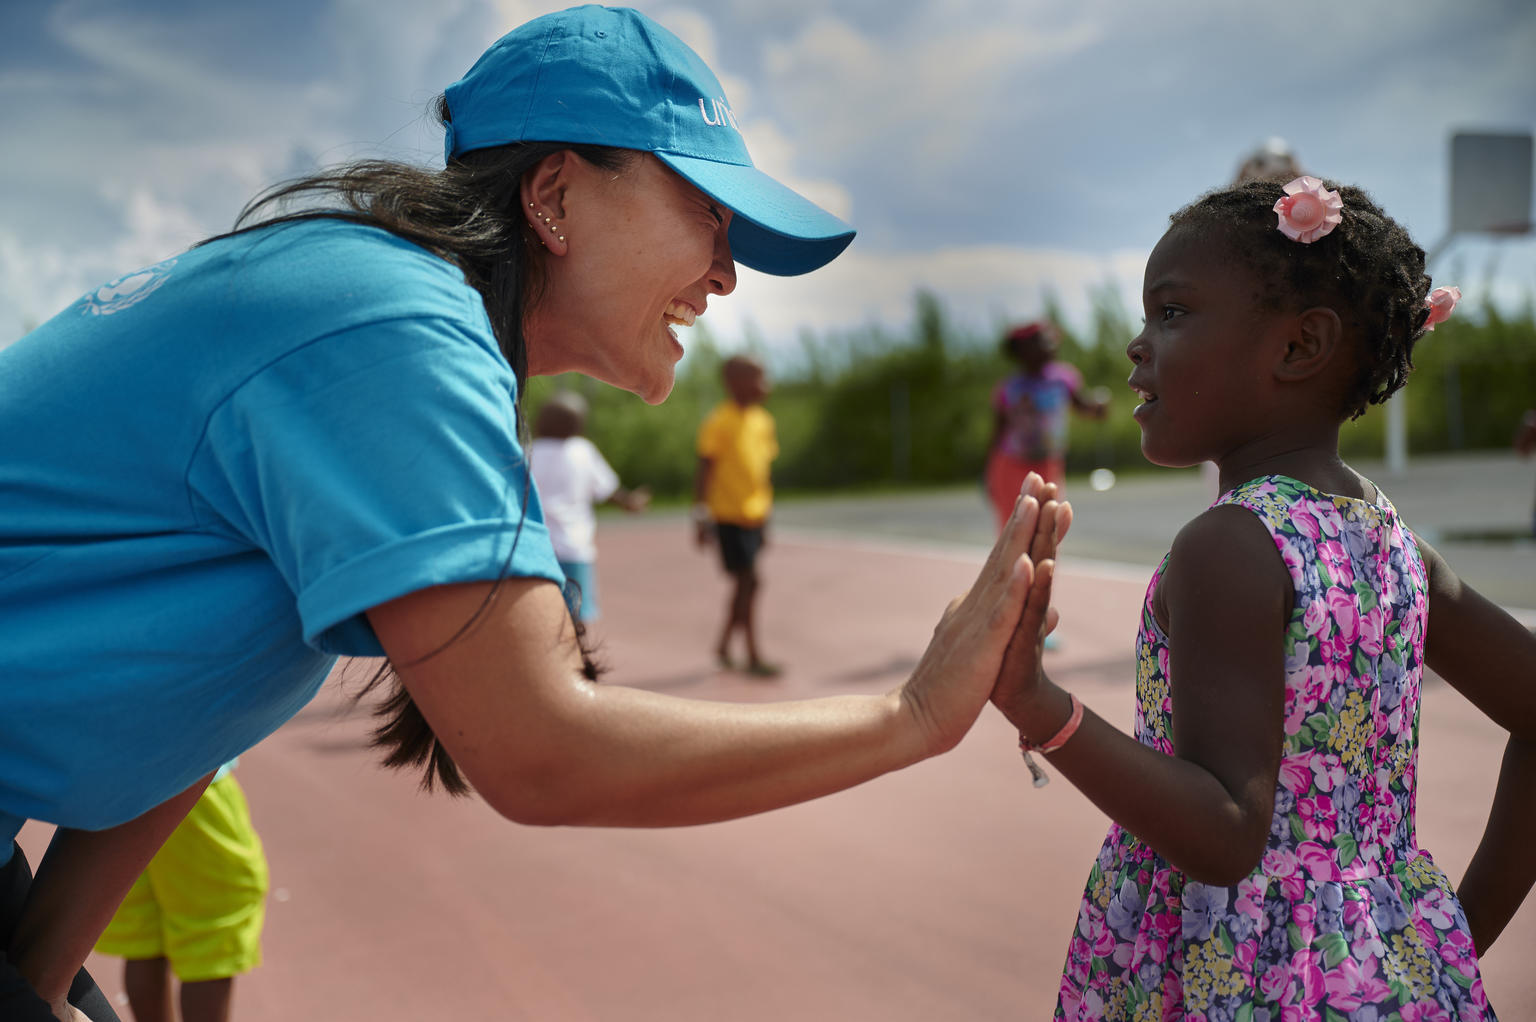 In September 2019 in the Bahamas, children who have been evacuated in the aftermath of Hurricane Dorian participate in activities organized by UNICEF's partner organization, IsraAid, in Nassau.